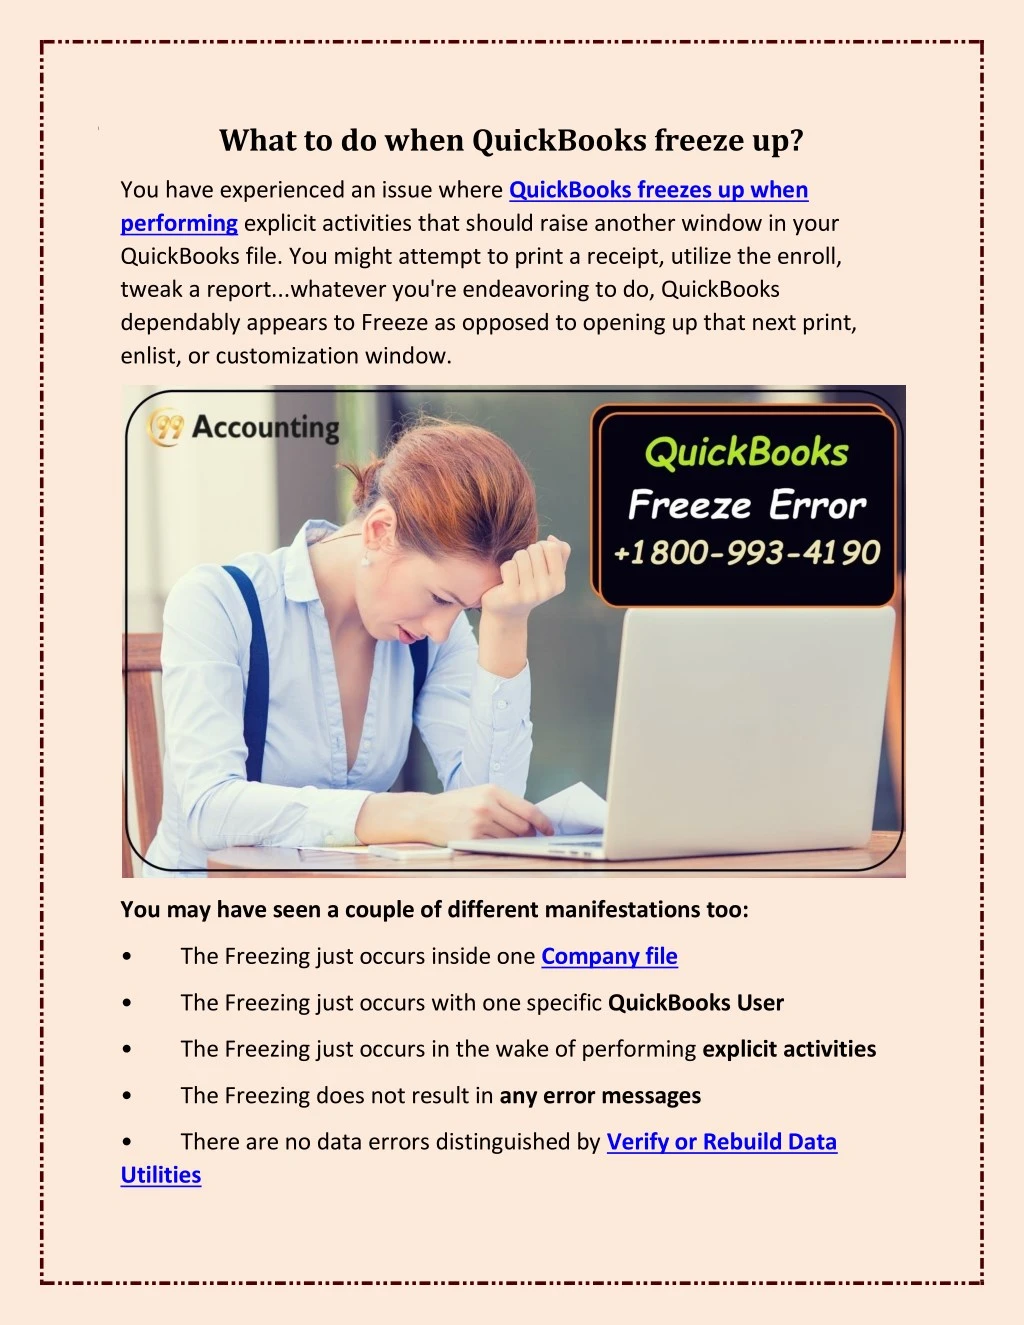 what to do when quickbooks freeze up